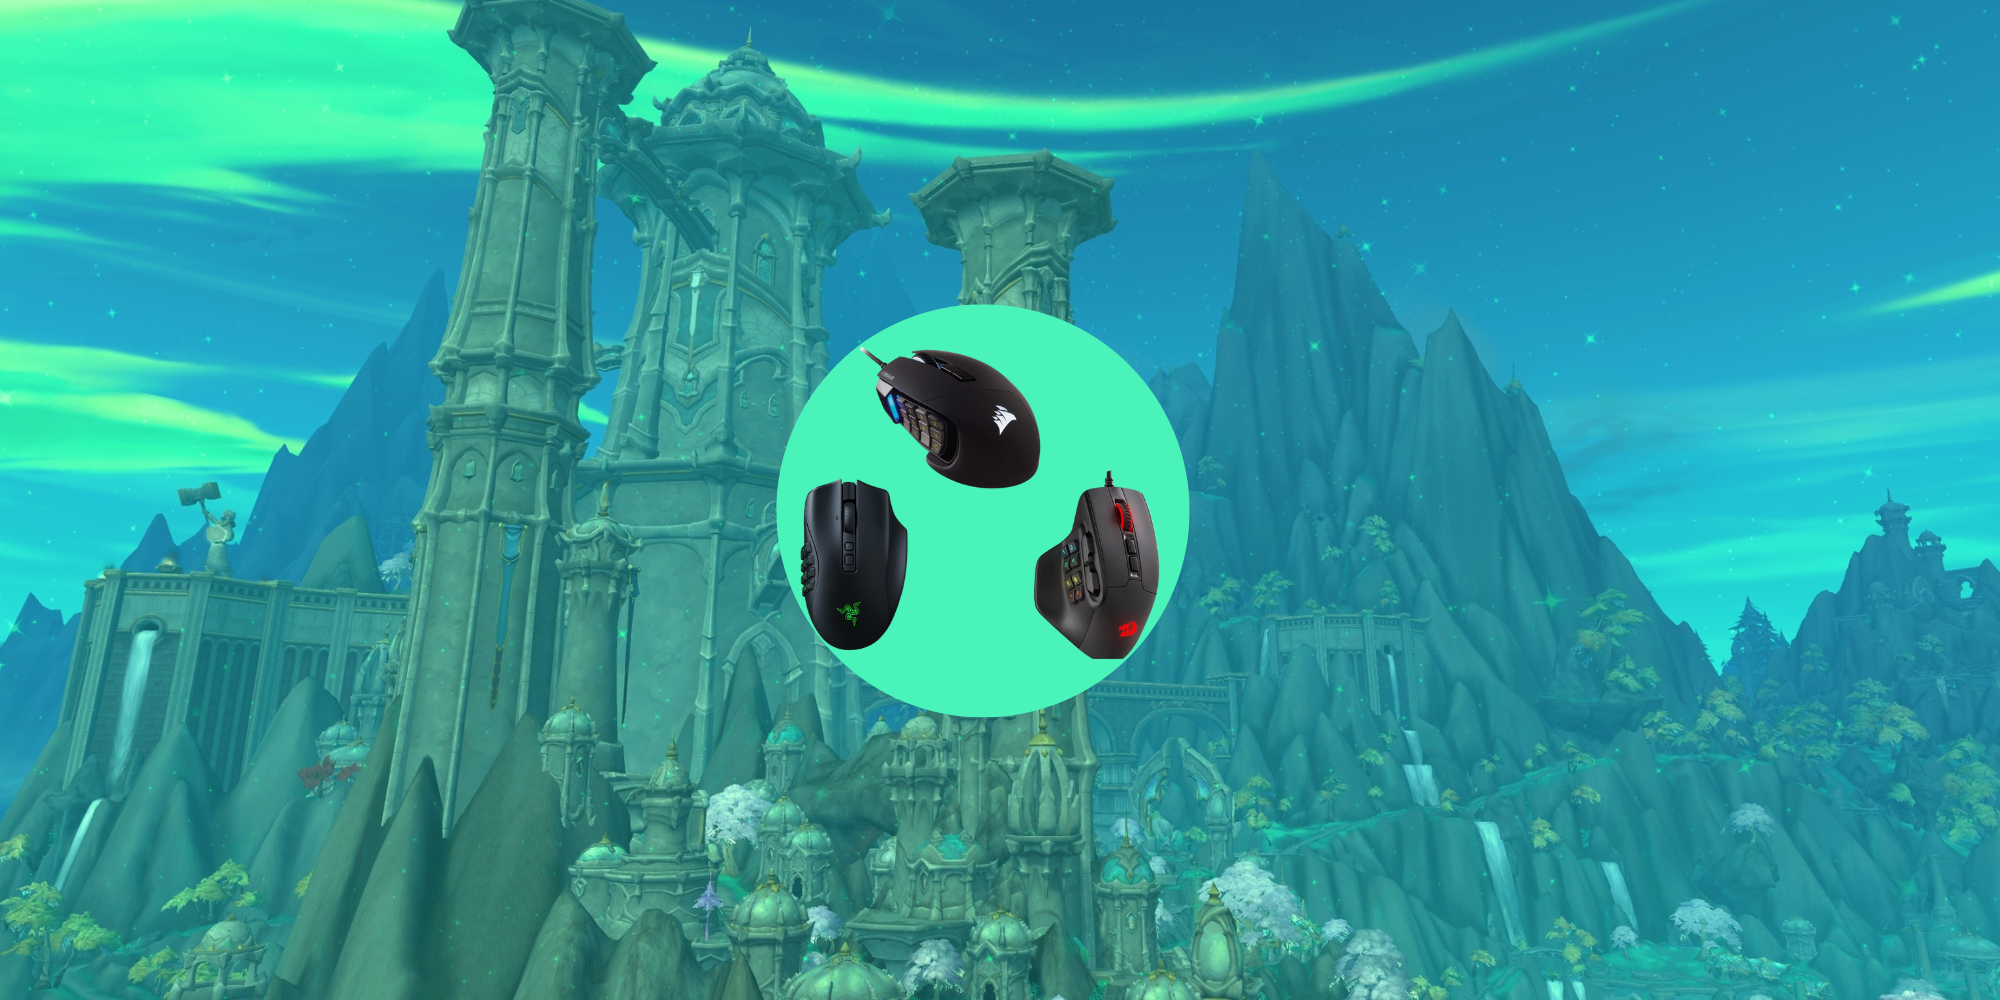 Three MMO mice in a green circle against Valdrakken as a backdrop.